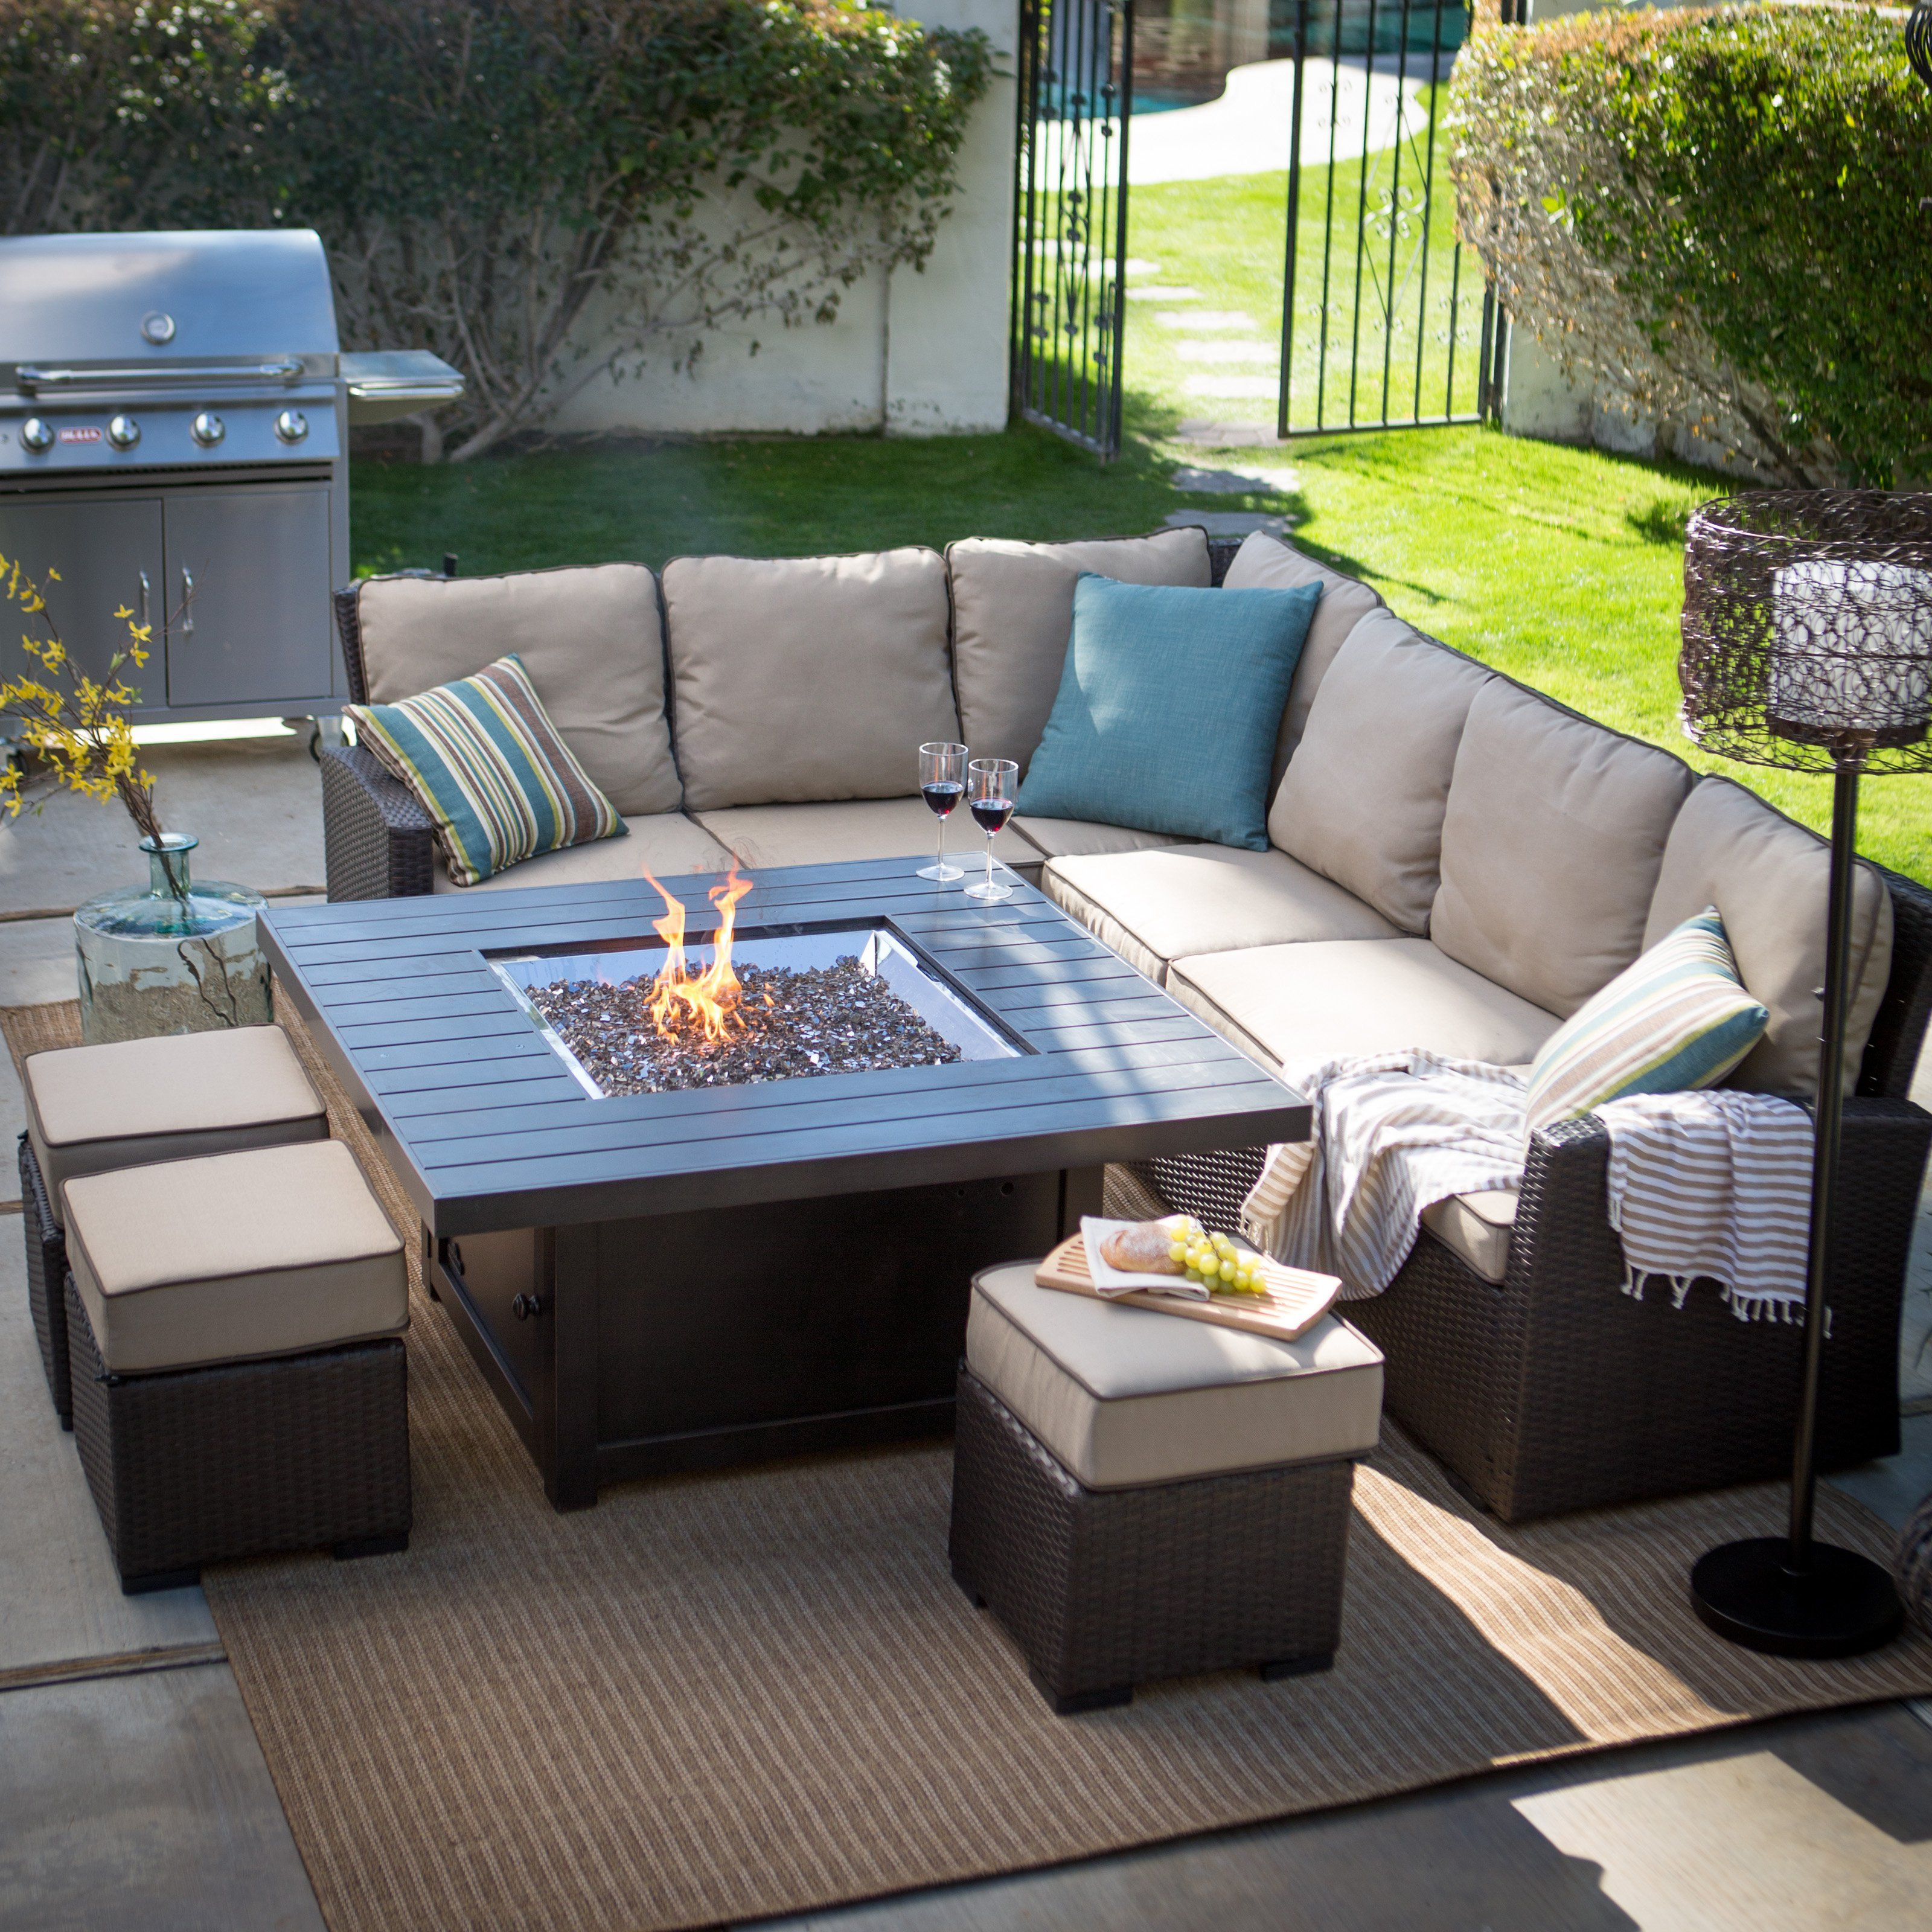 Outdoor Belham Living Monticello Fire Pit Chat Set Ttlc478 intended for dimensions 3200 X 3200